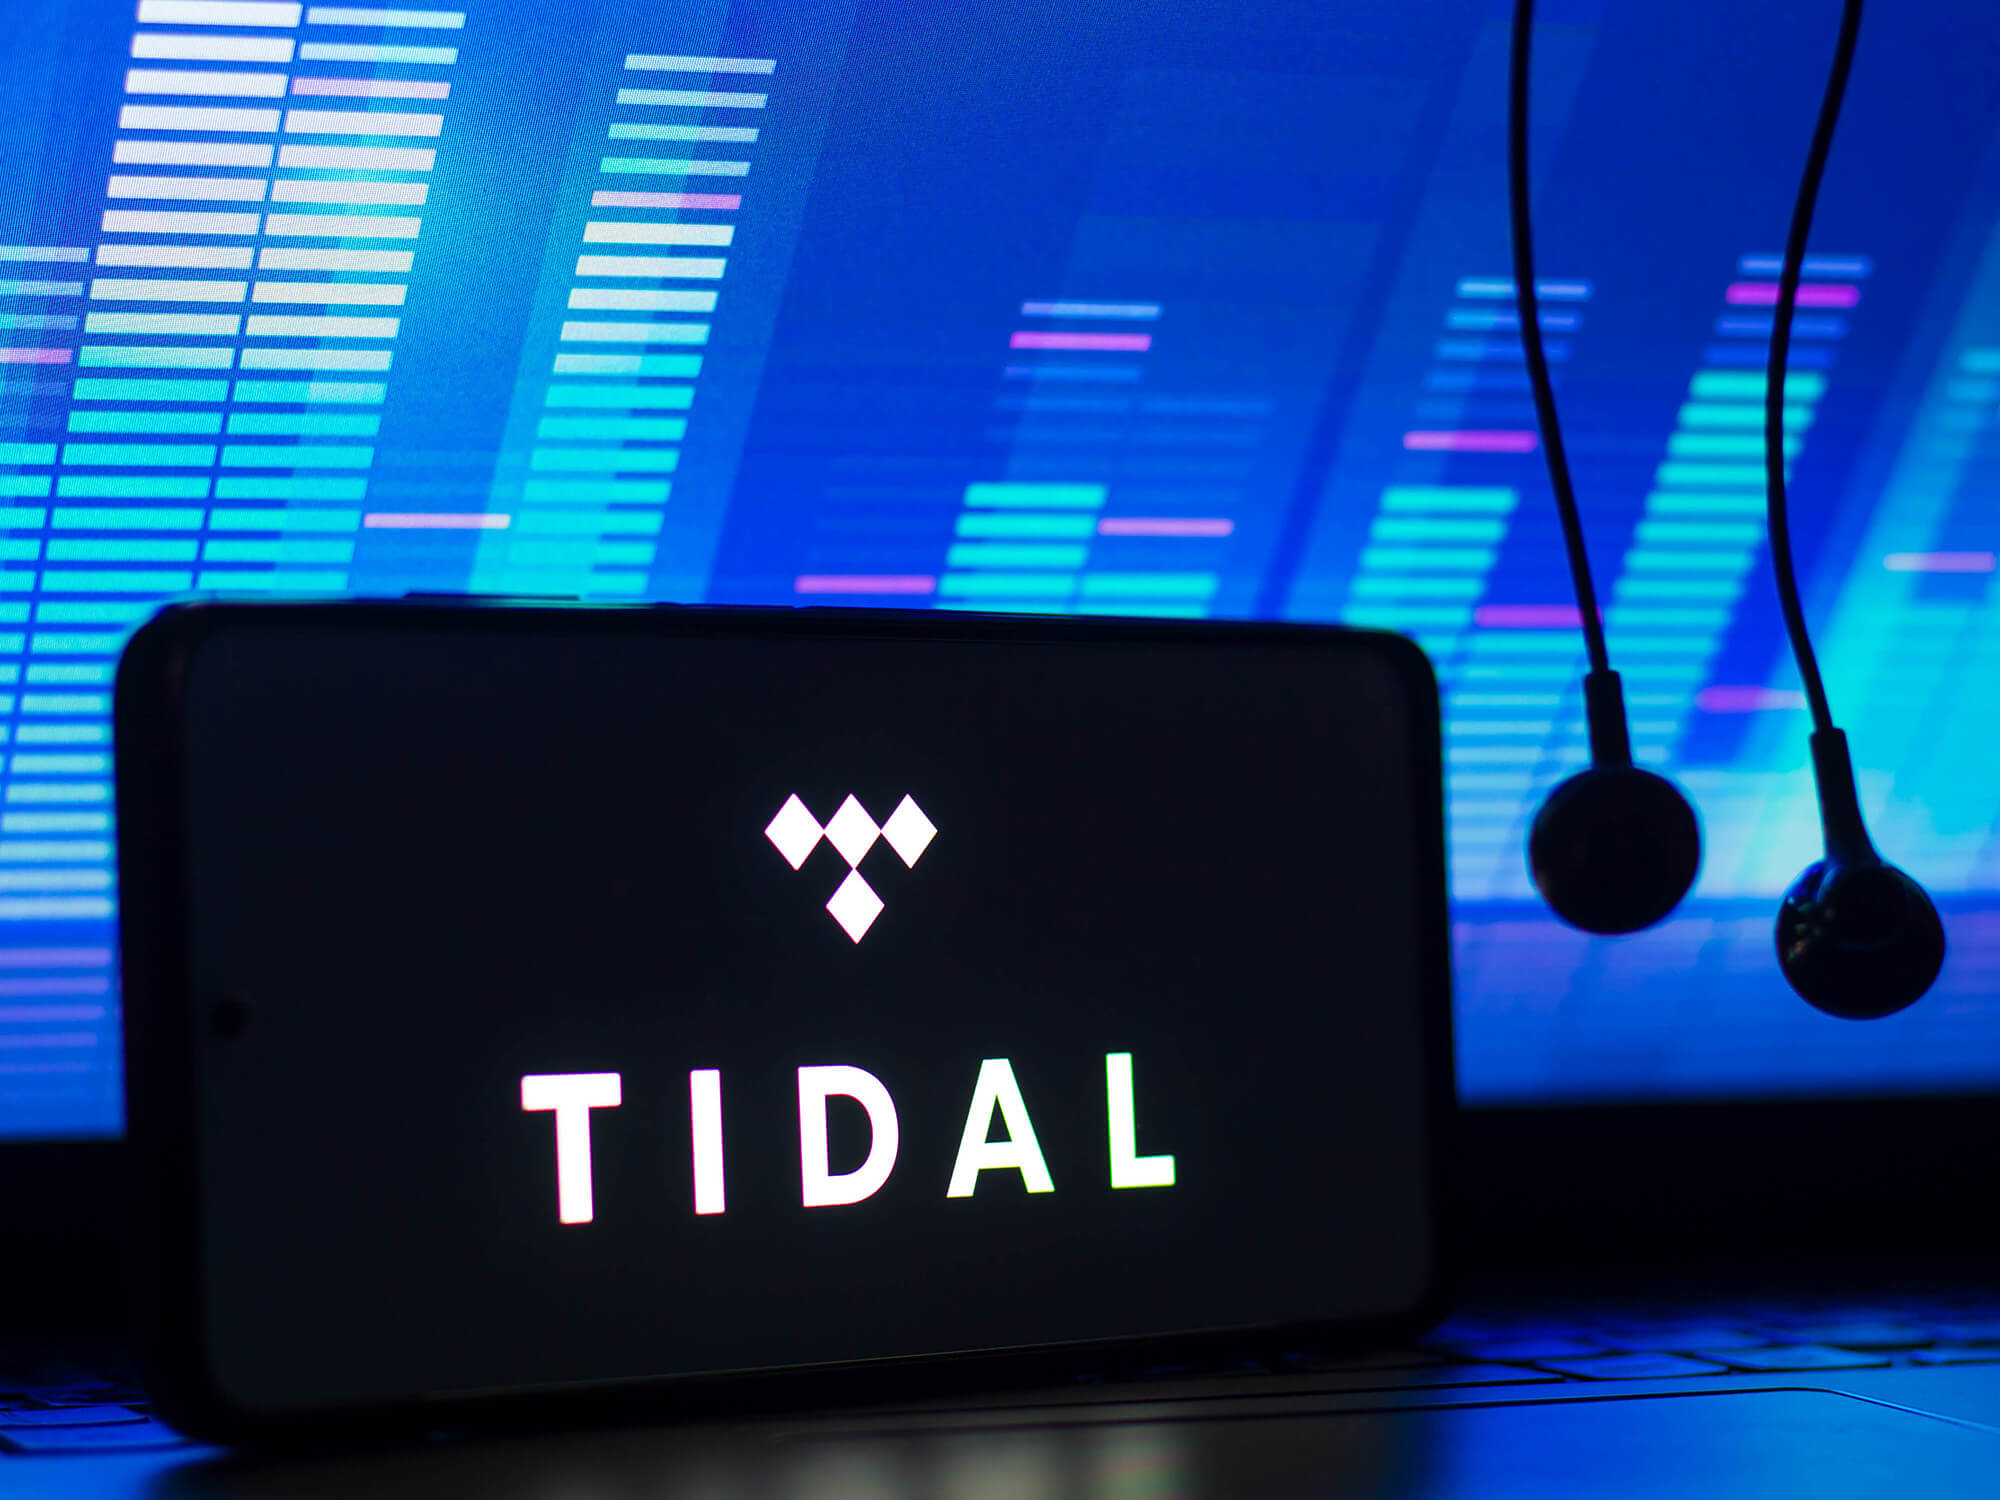 Tidal logo shown a phone screen which is turned on its side.